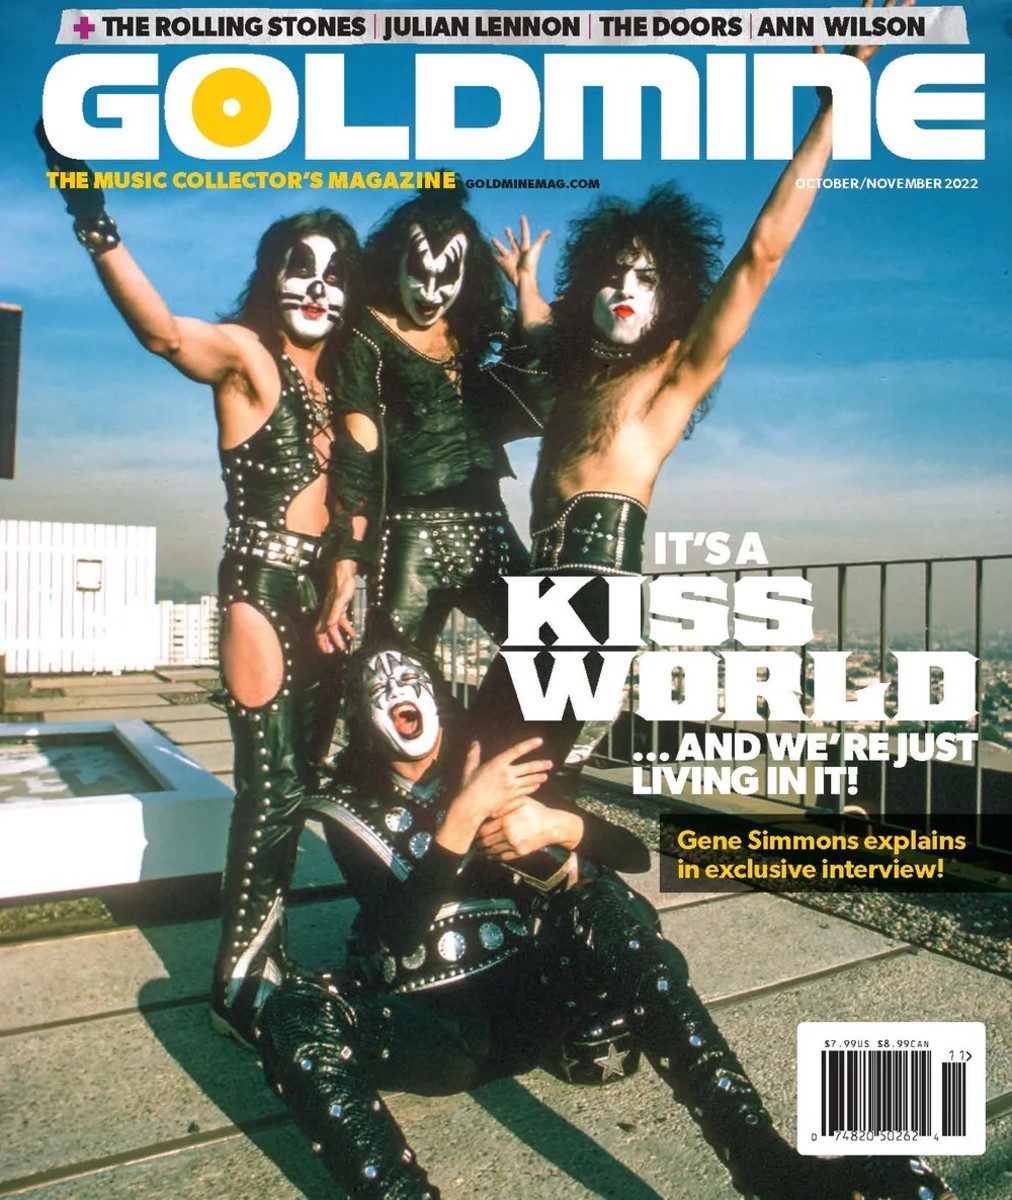 One of the KISS covers of Goldmine's Oct/Nov 2022 issue